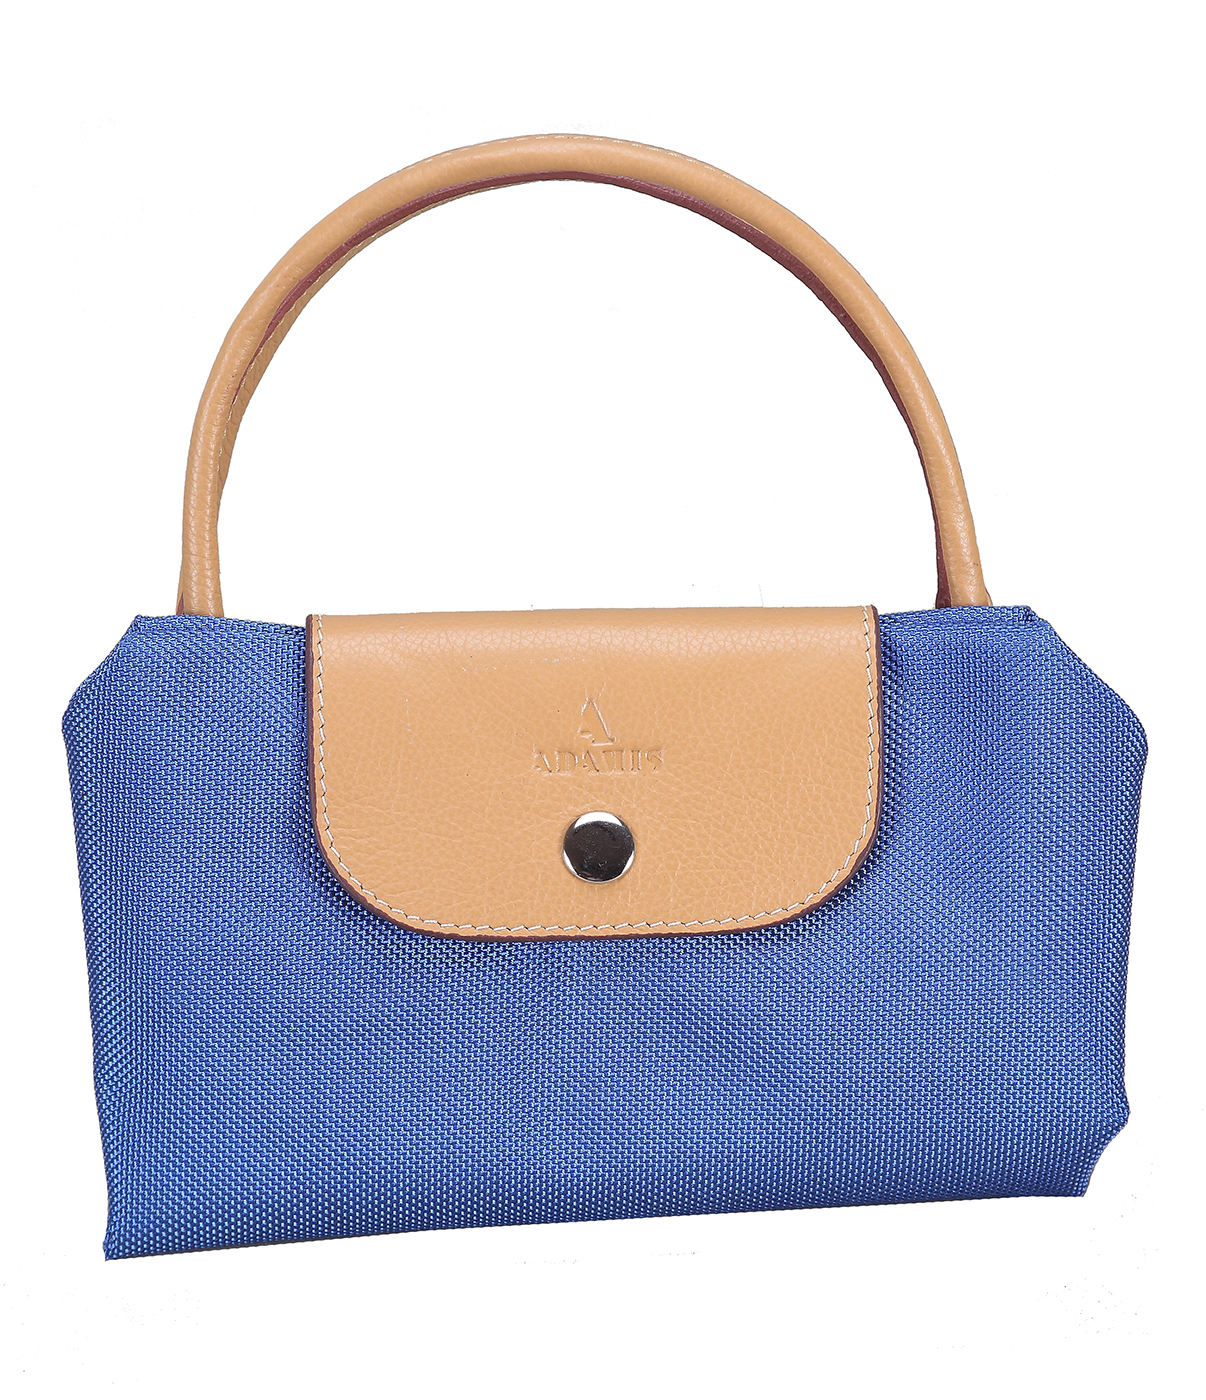 B690-Azul-Folding Tote in Tetron Material with Genuine Leather trimmings - Blue